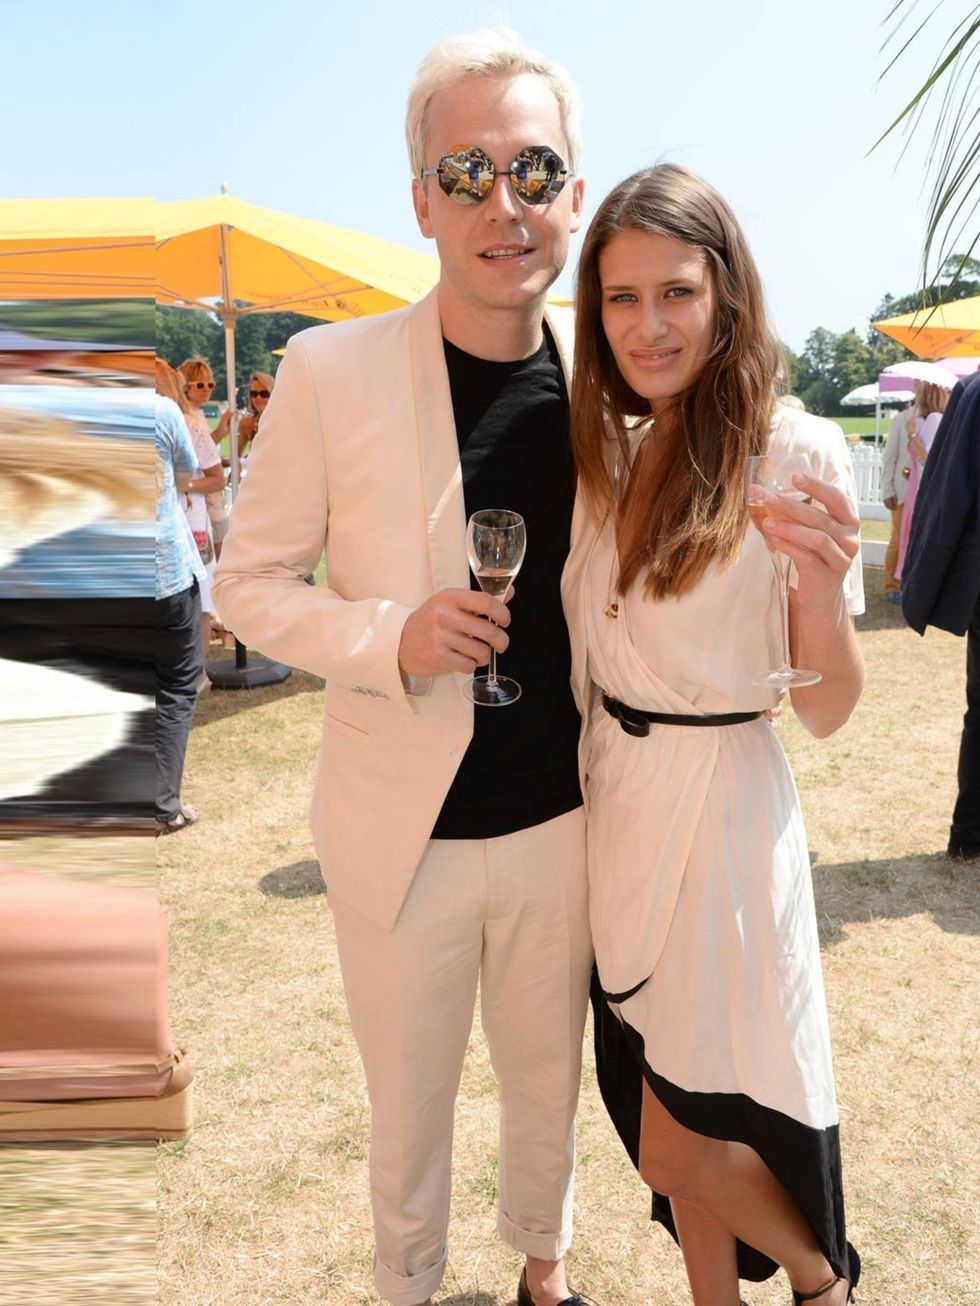 <p>Mr Hudson and Holly Grace raise their rosé. Cheers!</p><p><a href="http://www.elleuk.com/star-style/celebrity-fashion-trends/celebrity-summer-heatwave-fashion-looks"></a></p>